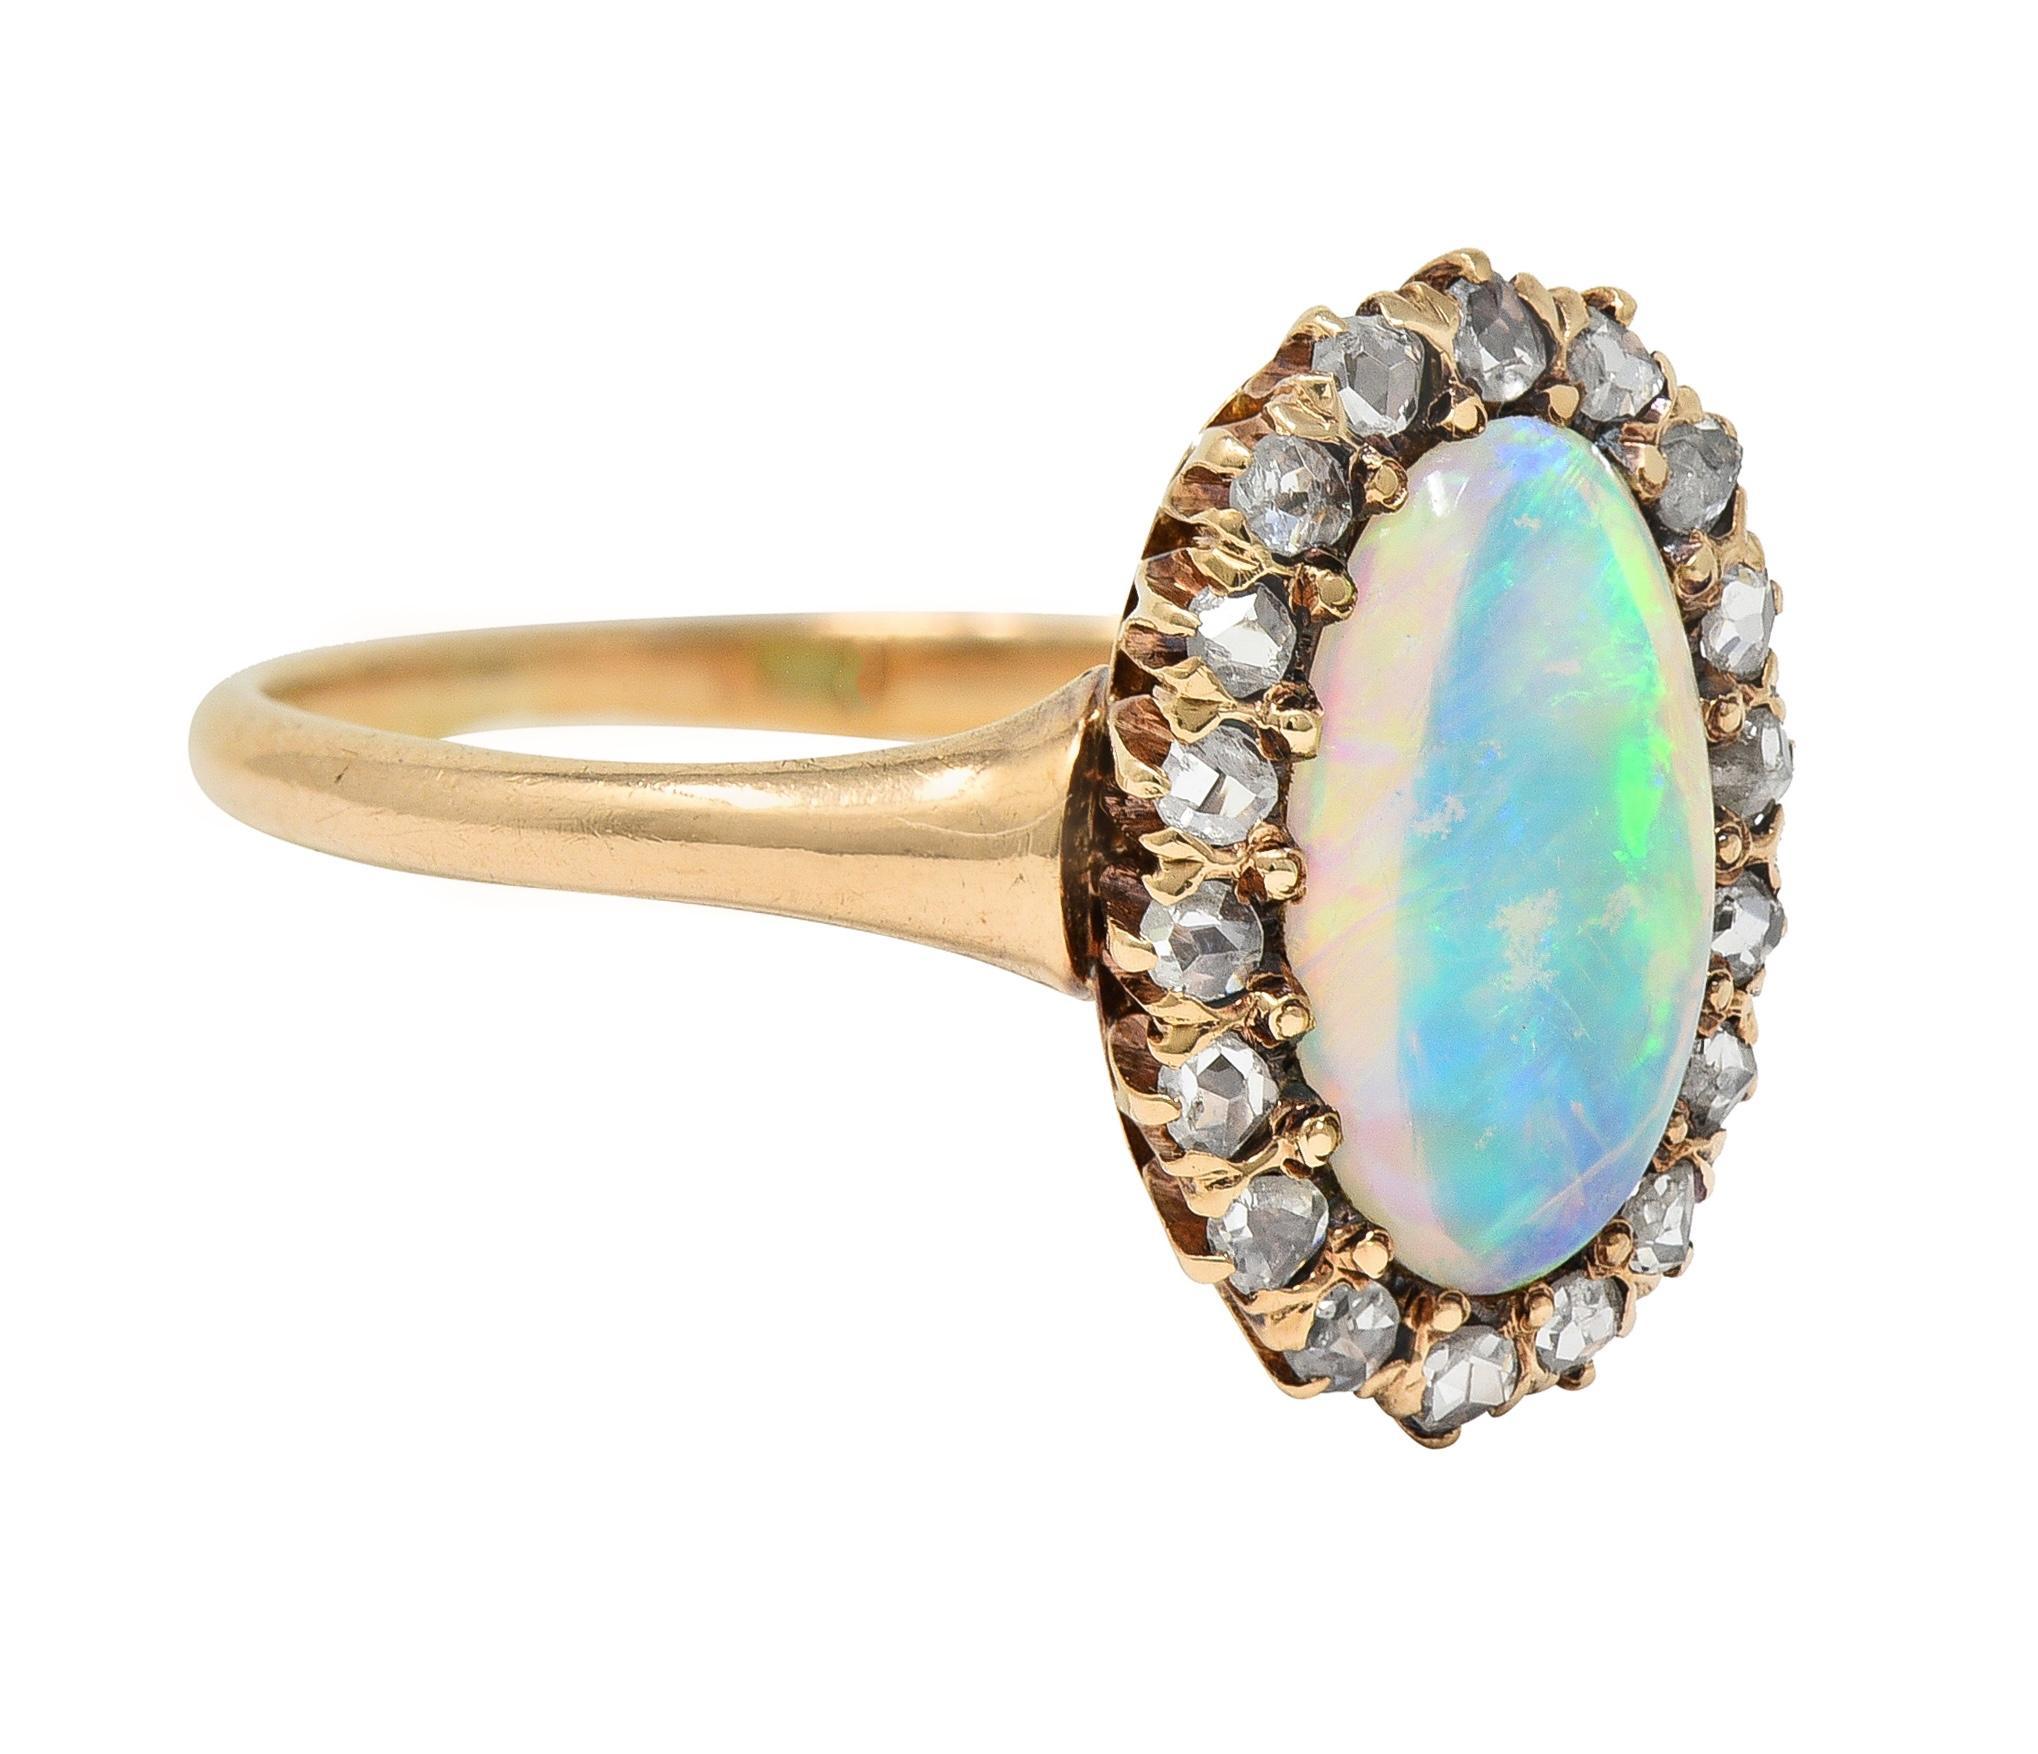 Centering an oval-shaped opal cabochon measuring 6.0 x 10.5 mm 
Translucent white in body color with strong spectral play-of-color 
Bead set with a halo surround of rose cut diamonds 
Weighing approximately 0.18 carat total 
Eye clean and bright -